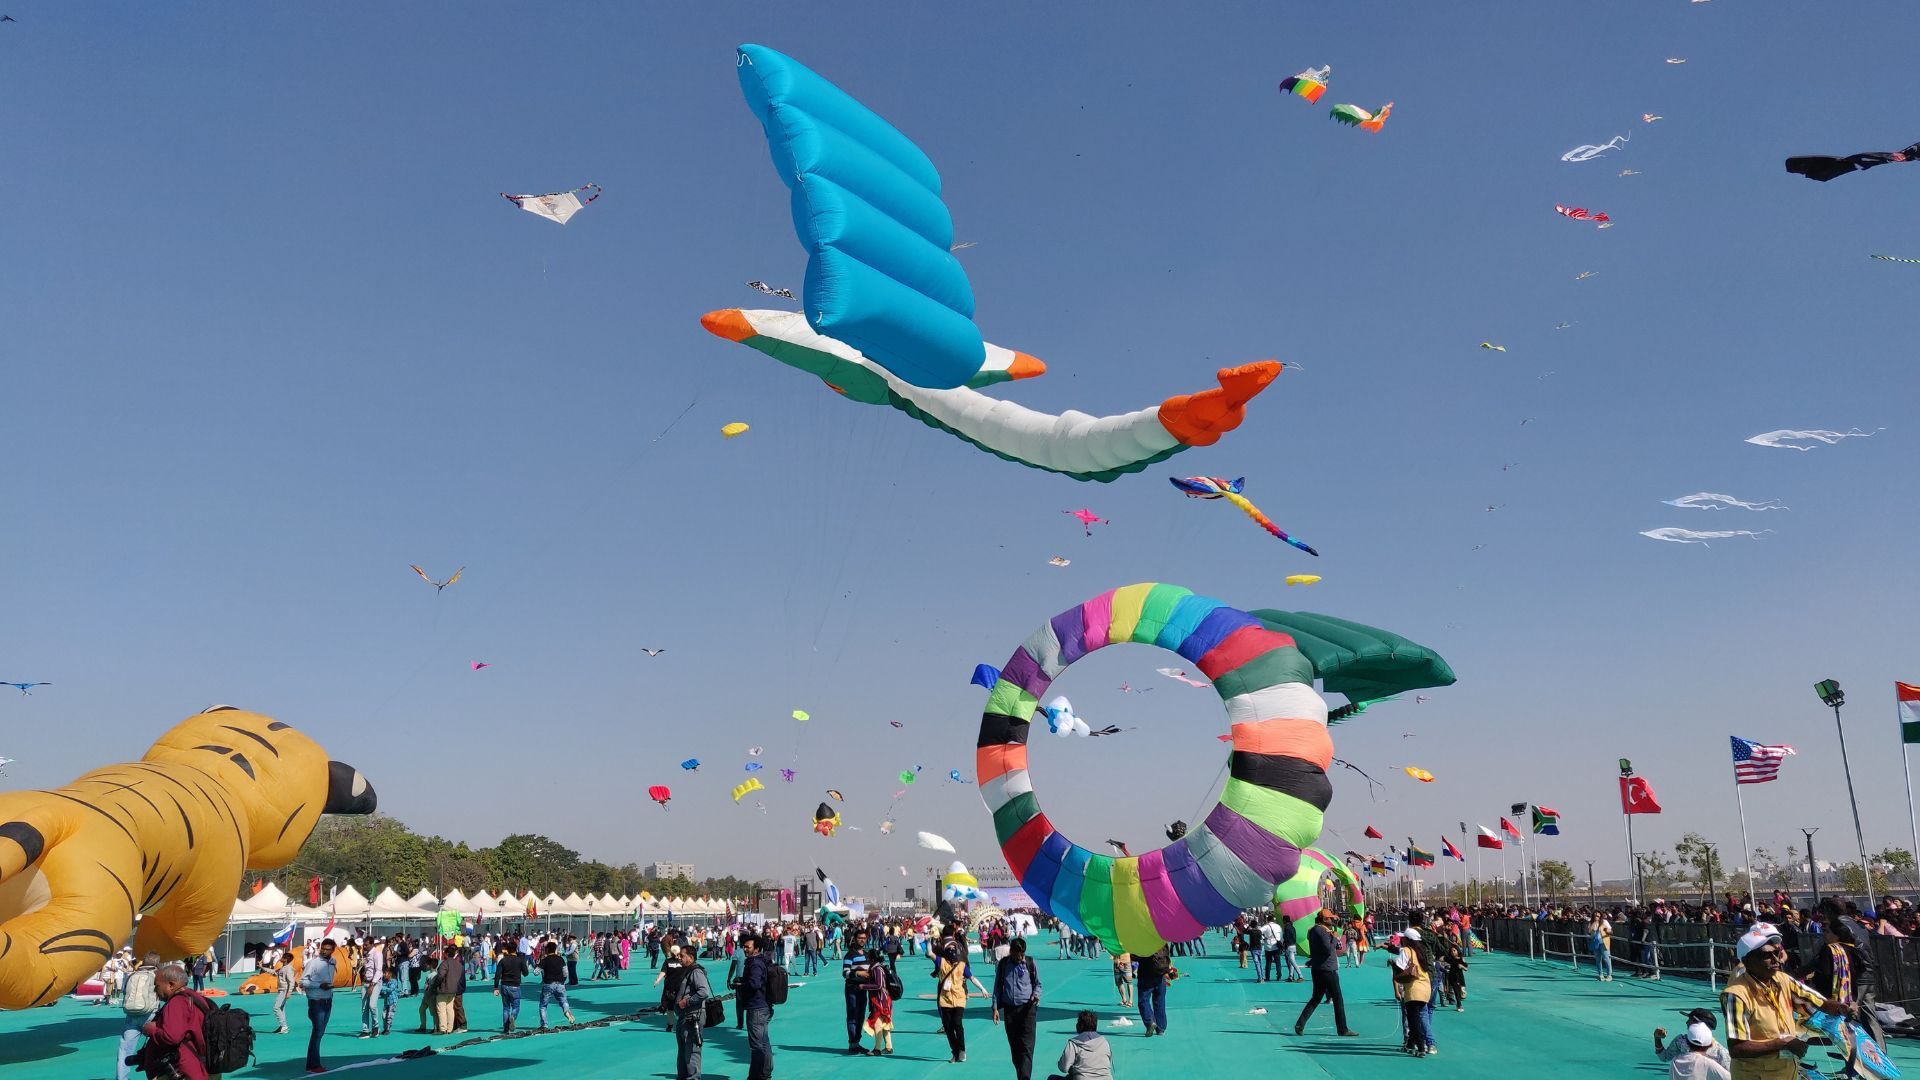 International kite festival in gujarat will have participating countries